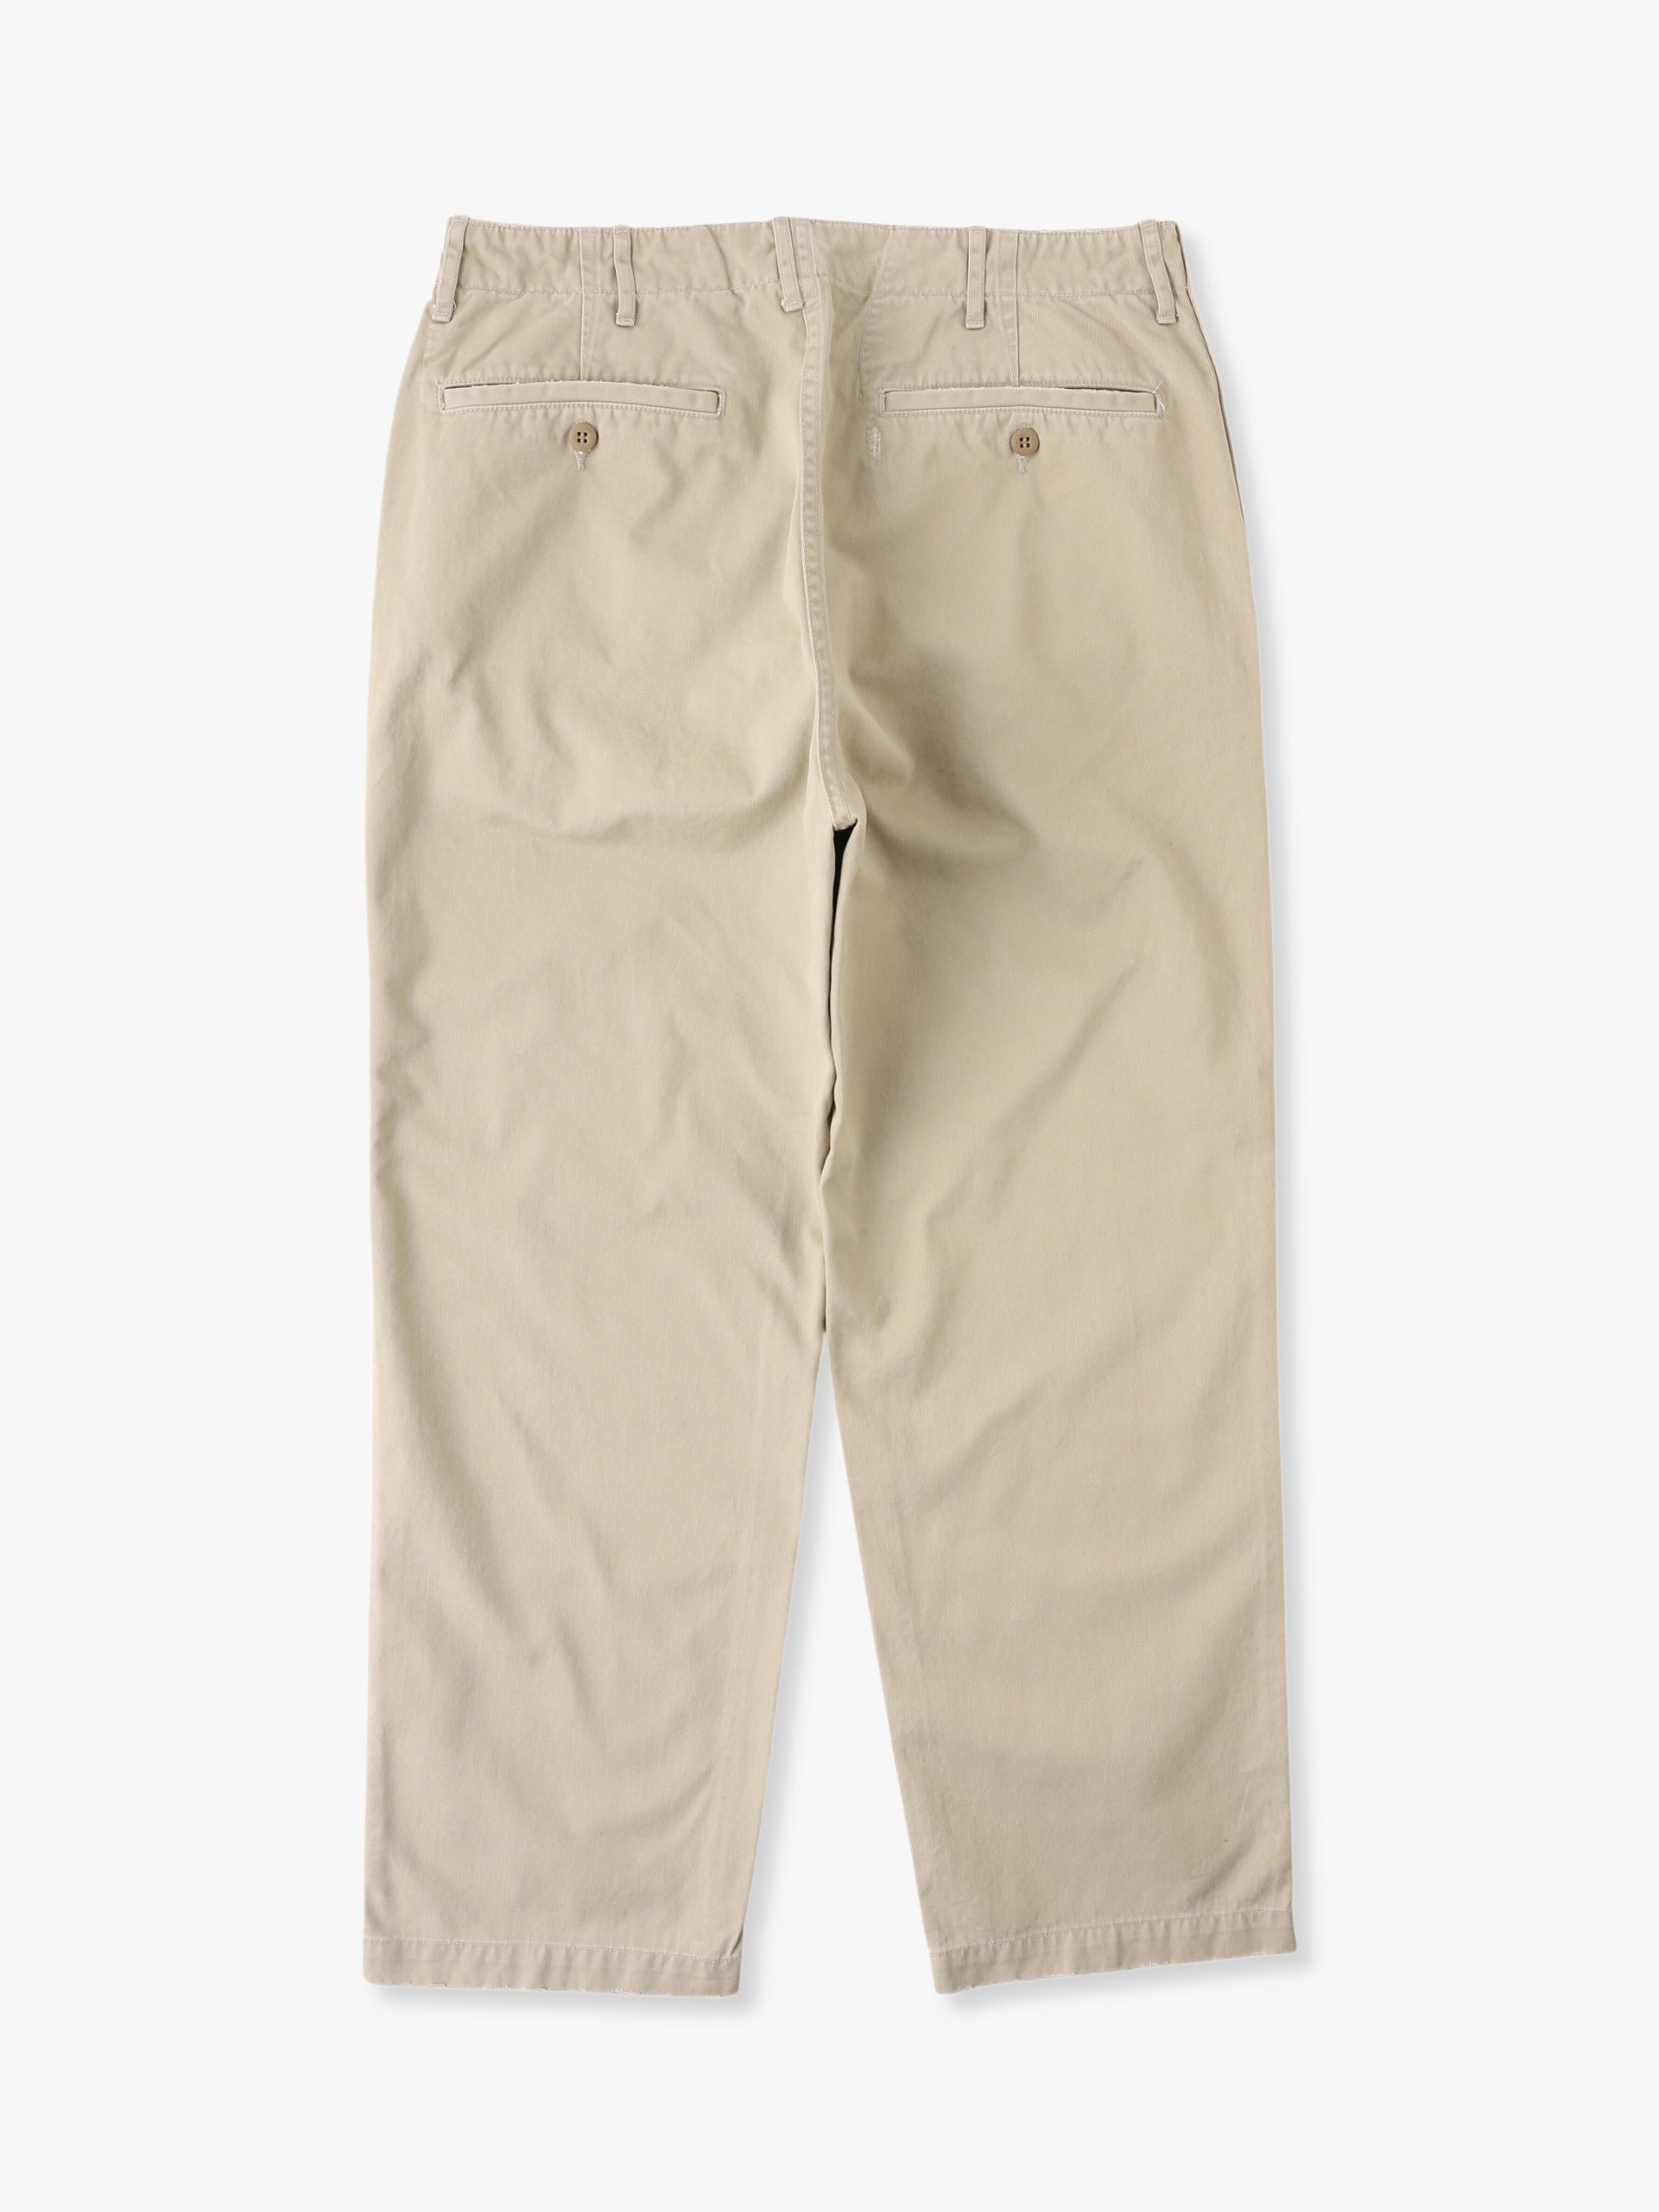 Repaired Chino Pants 詳細画像 beige 1